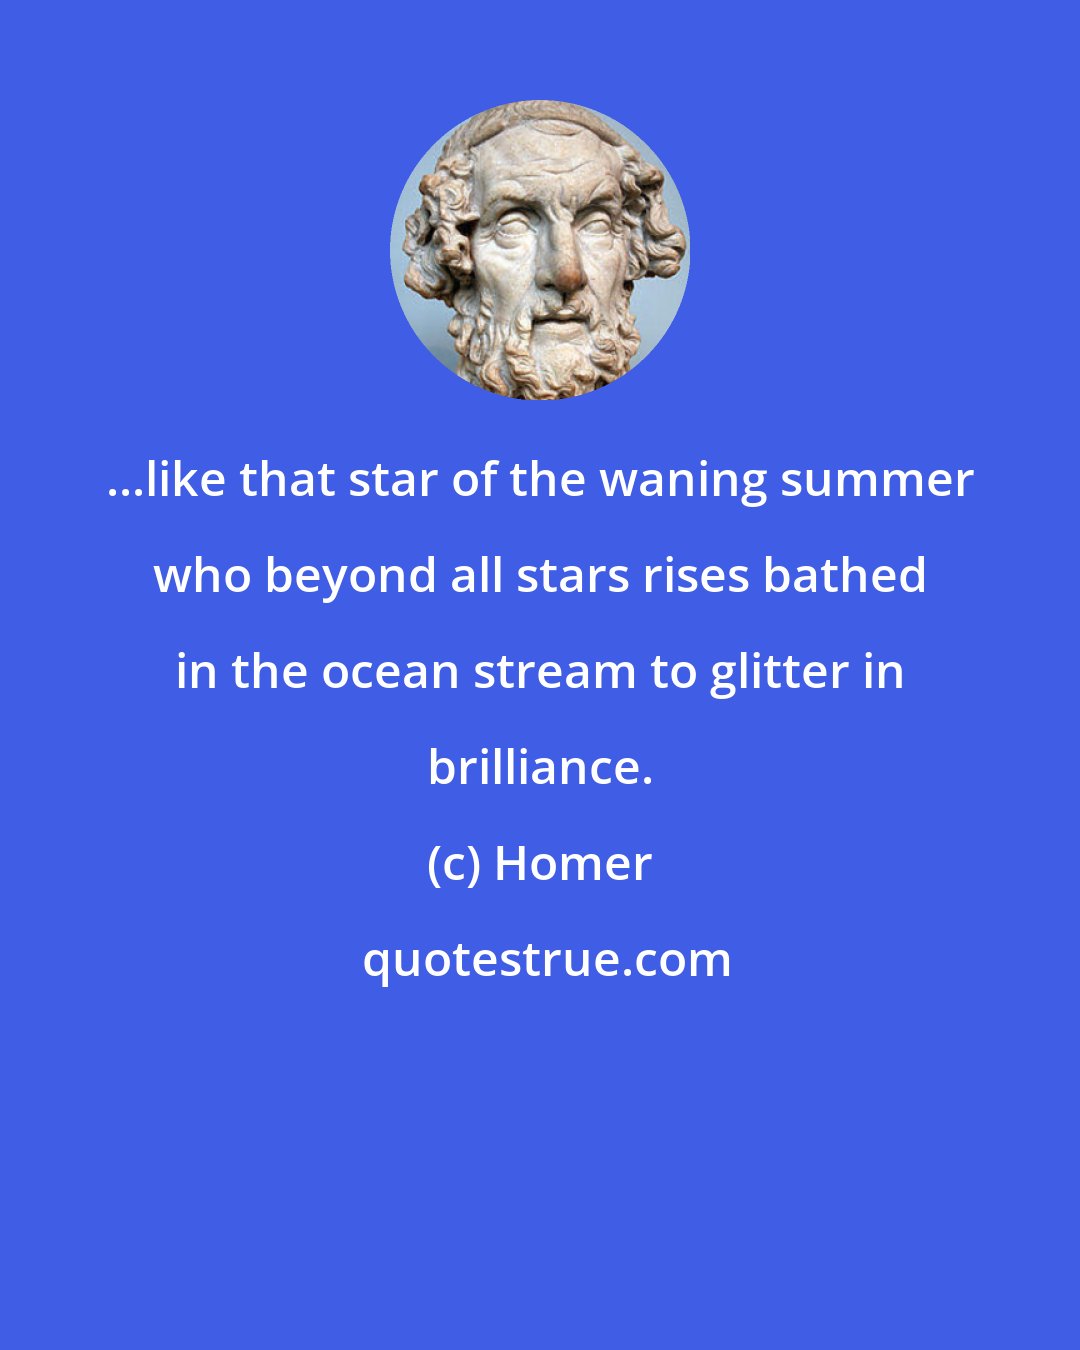 Homer: ...like that star of the waning summer who beyond all stars rises bathed in the ocean stream to glitter in brilliance.